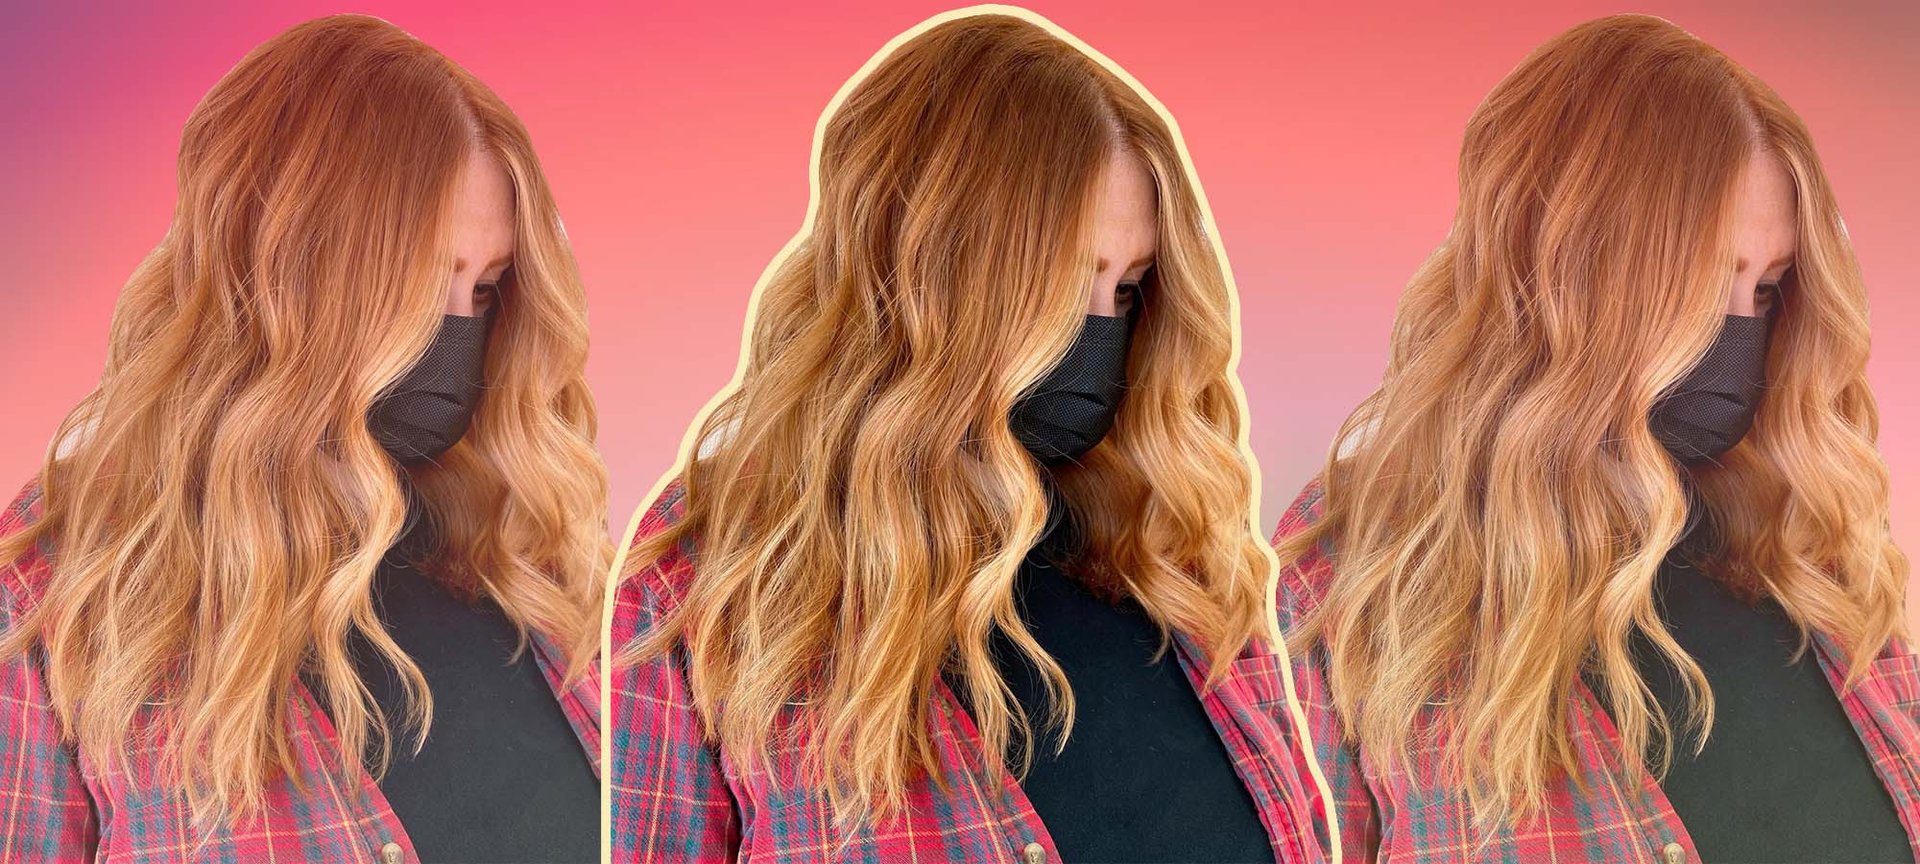 How to Get Strawberry Blonde Highlights - L'Oréal Paris